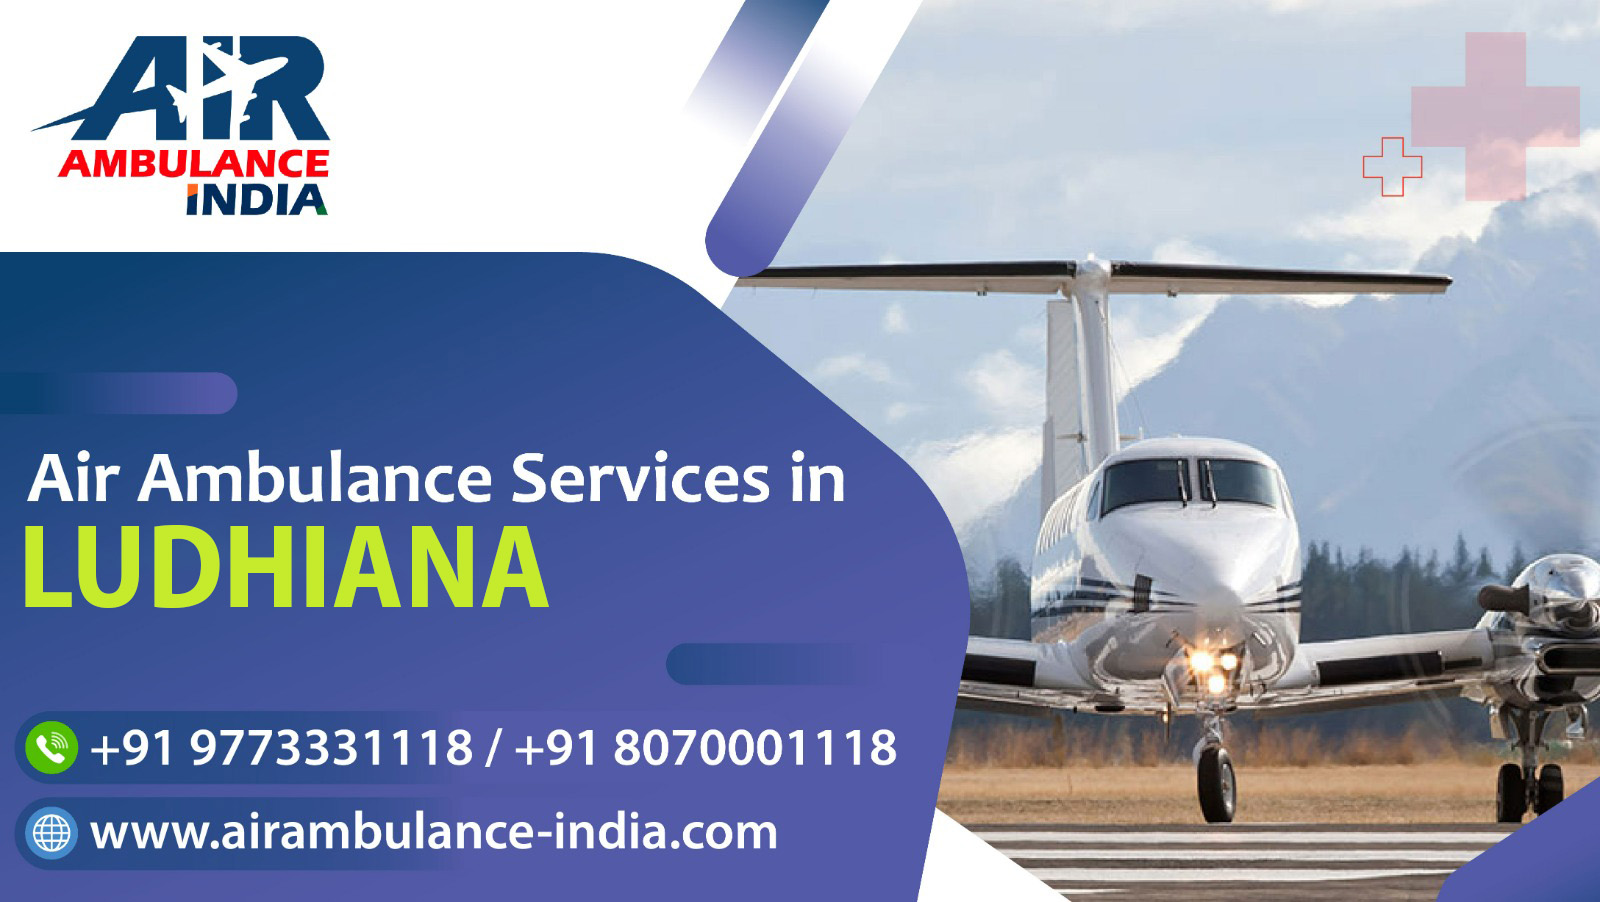 Air Ambulance Services in Ludhiana